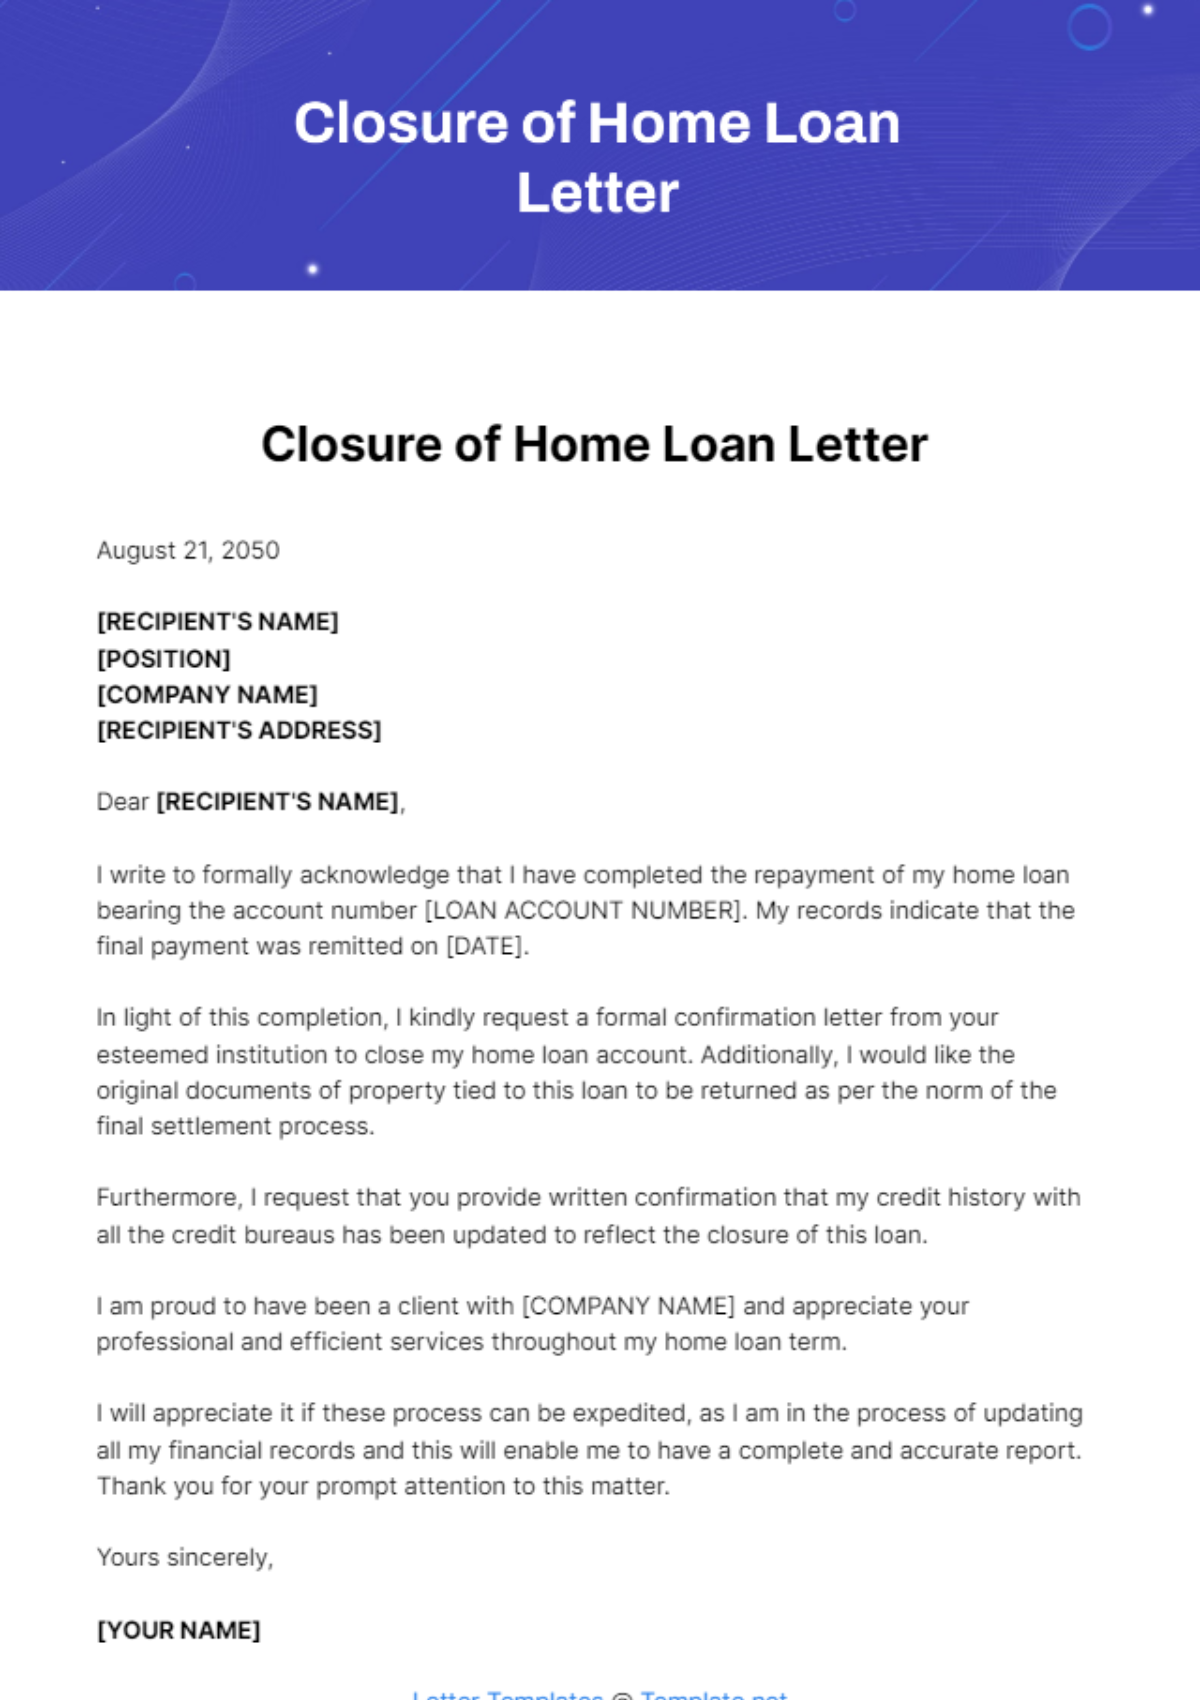 Free Closure of Home Loan Letter Template